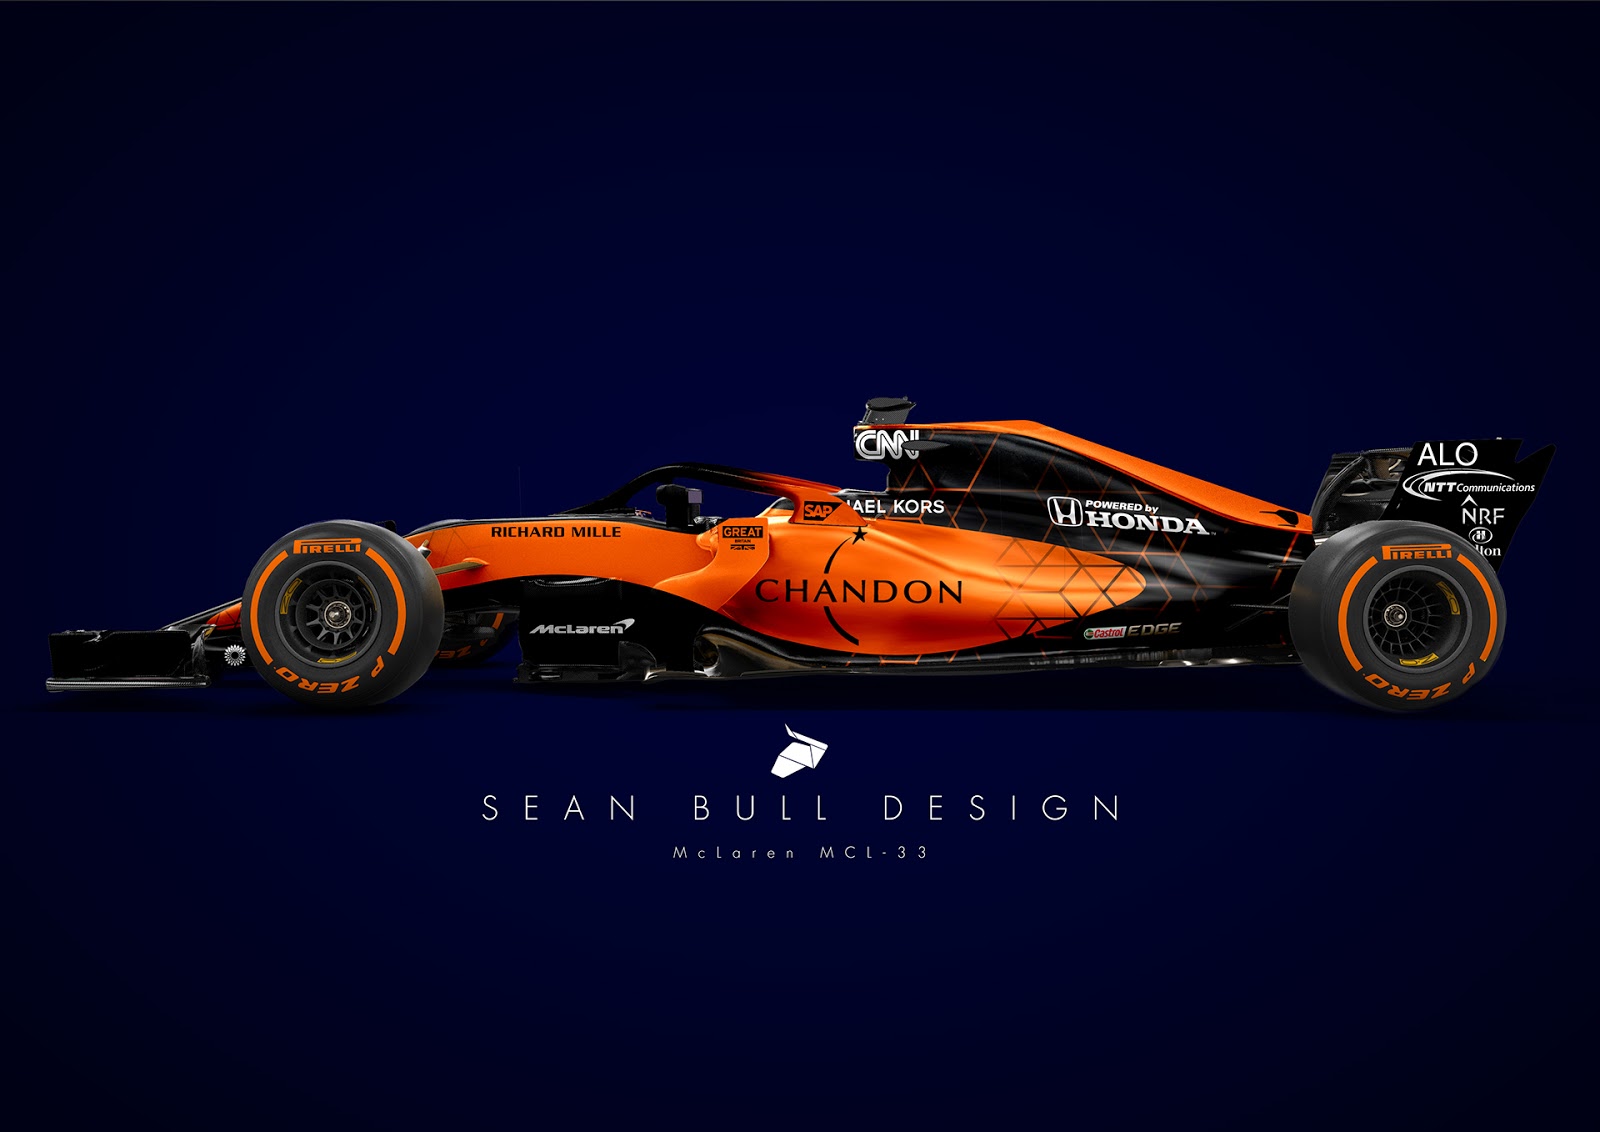 2018 F1 Liveries Could Make The Halo Look Almost Acceptable | Carscoops